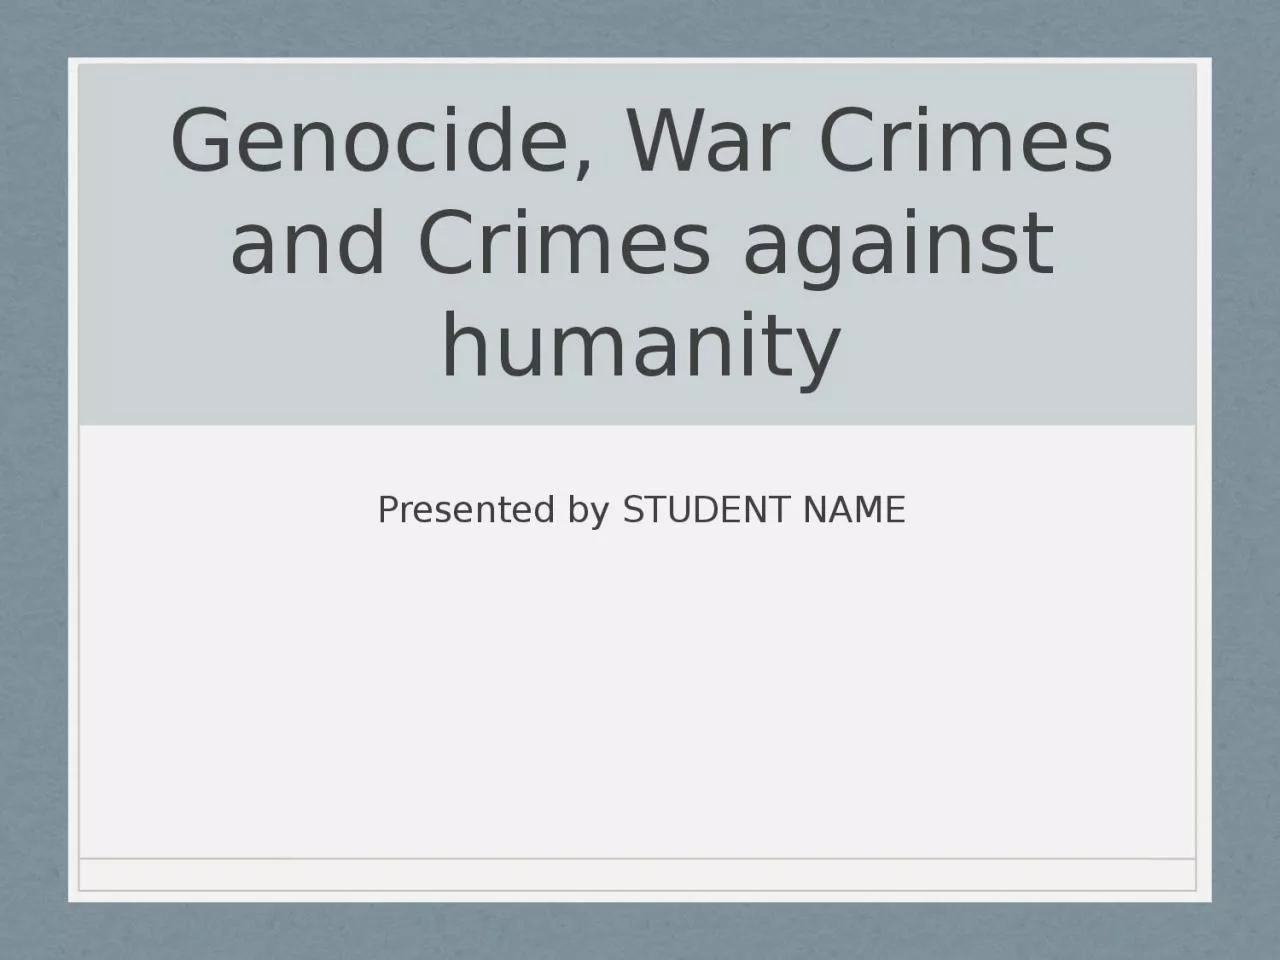 Genocide, War Crimes and Crimes against humanity